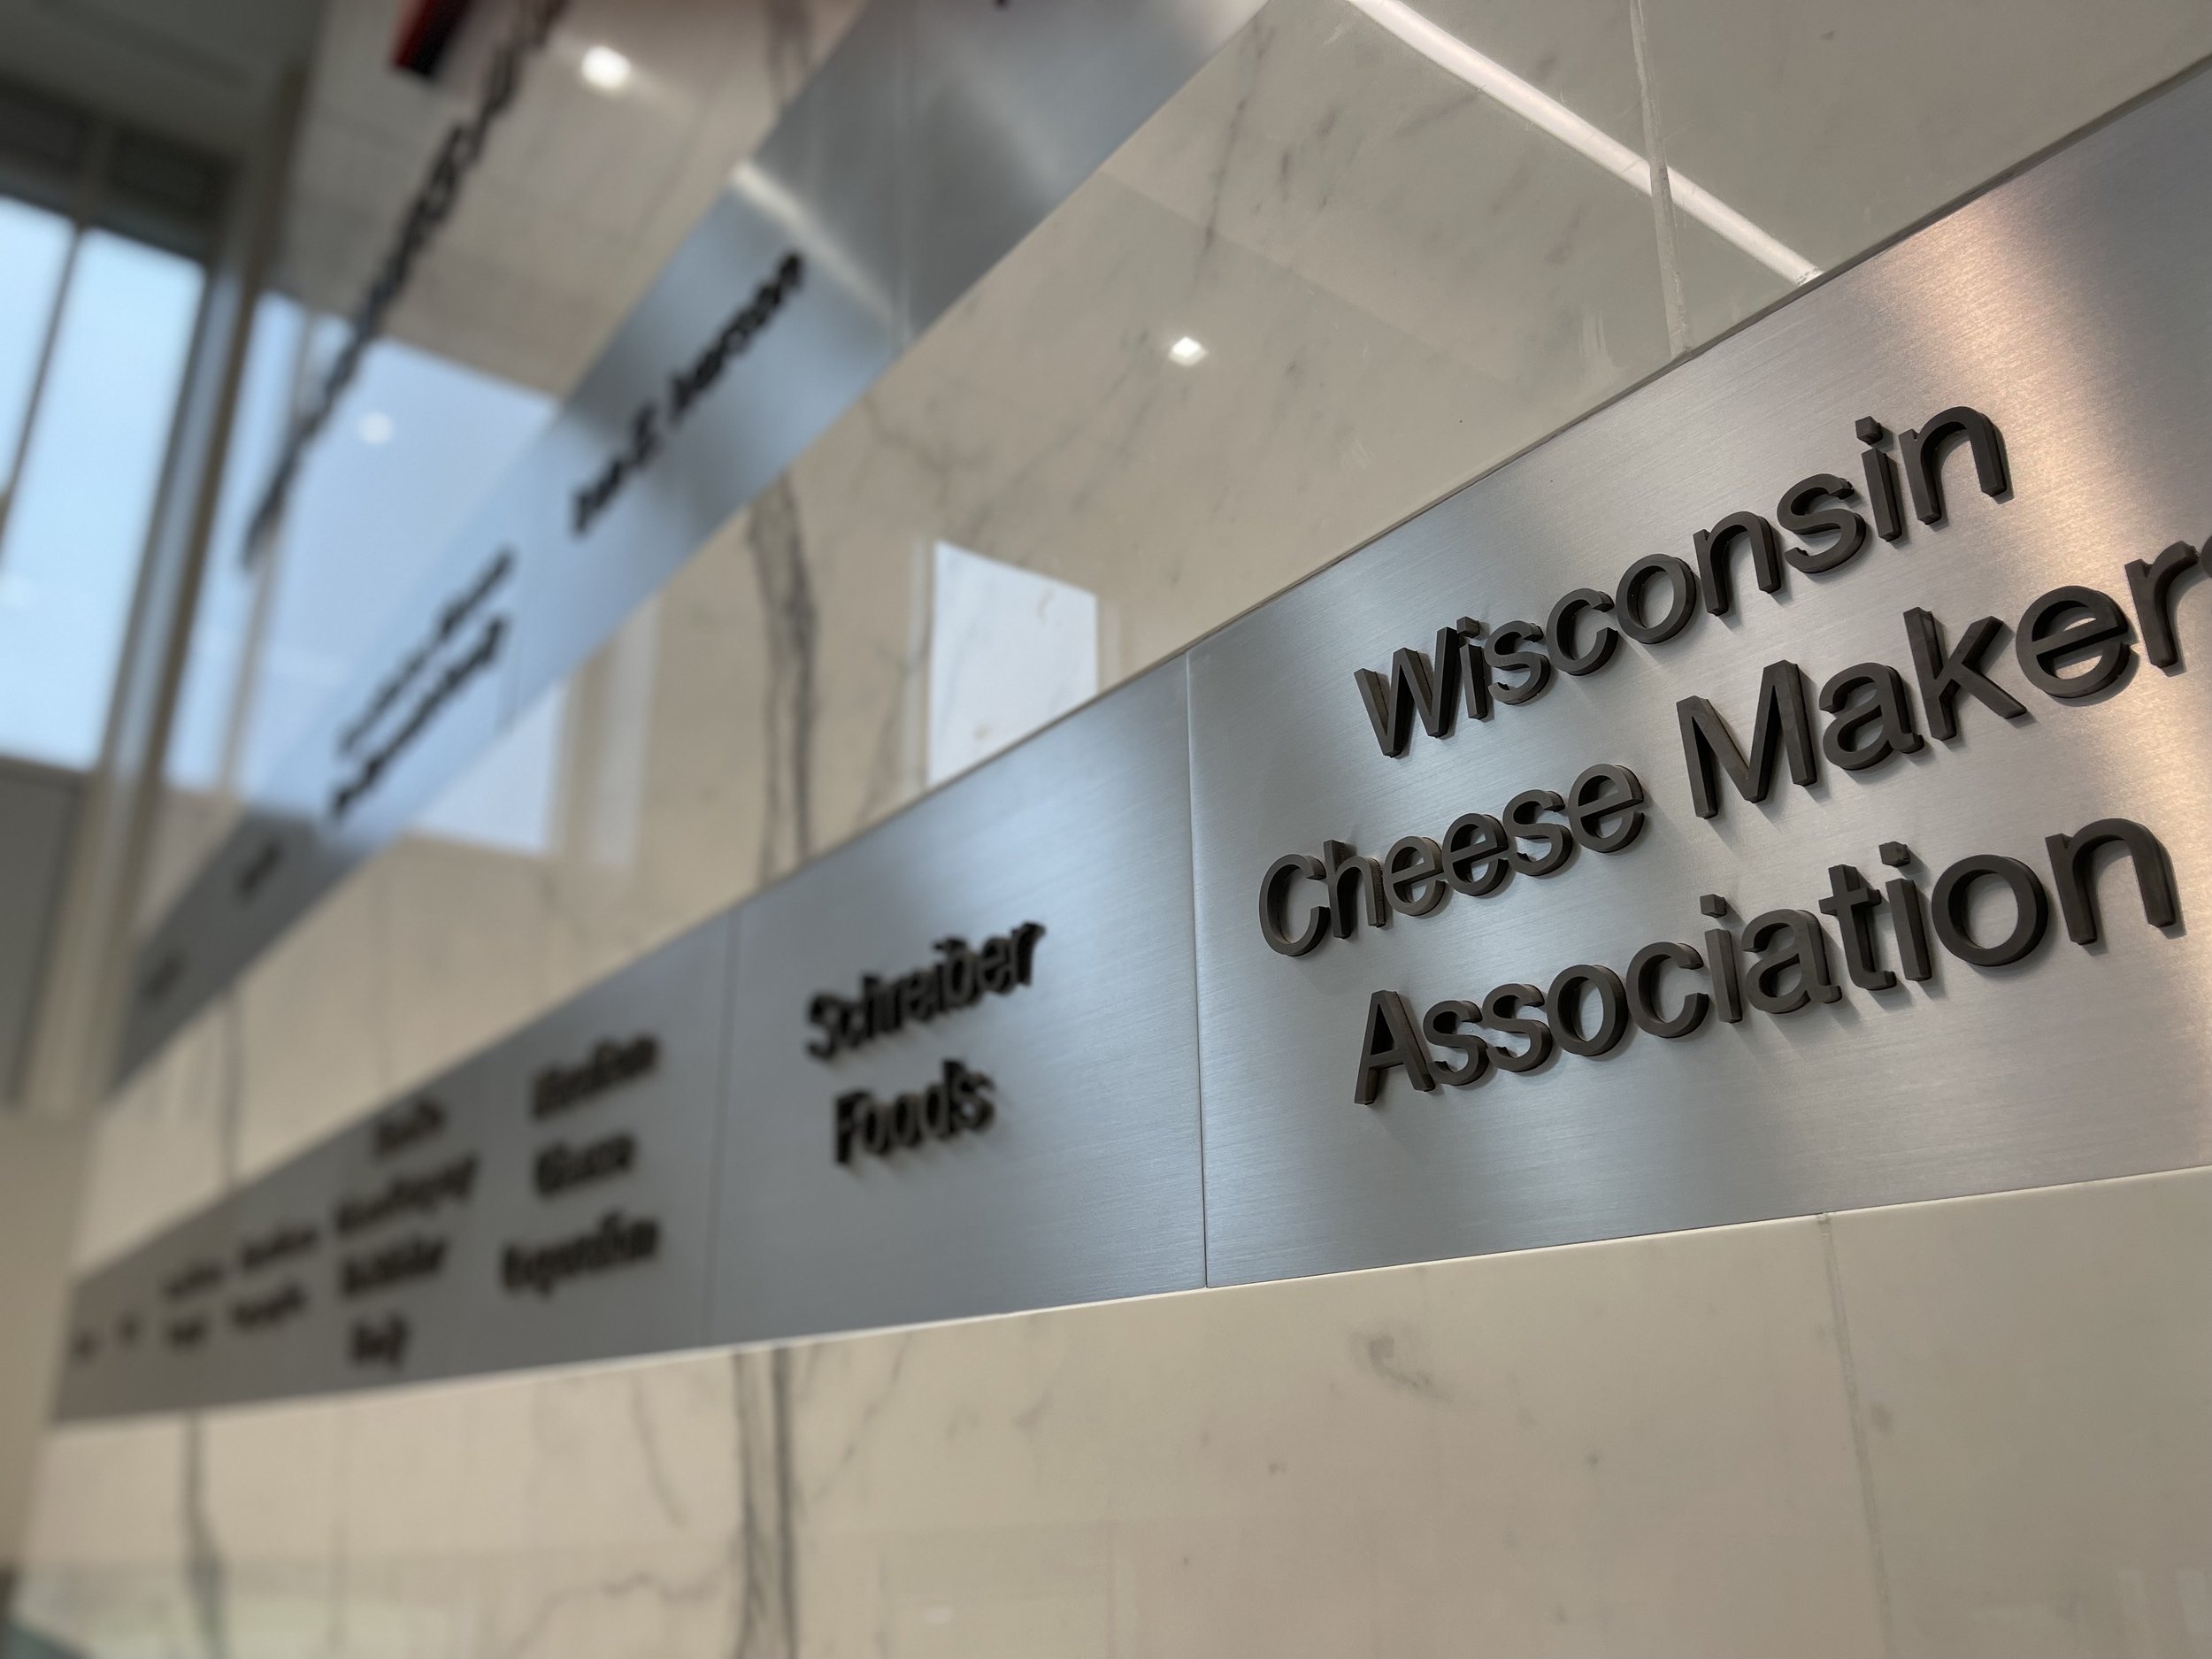 University of Wisconsin Madison Center for Dairy Research Babcock Hall